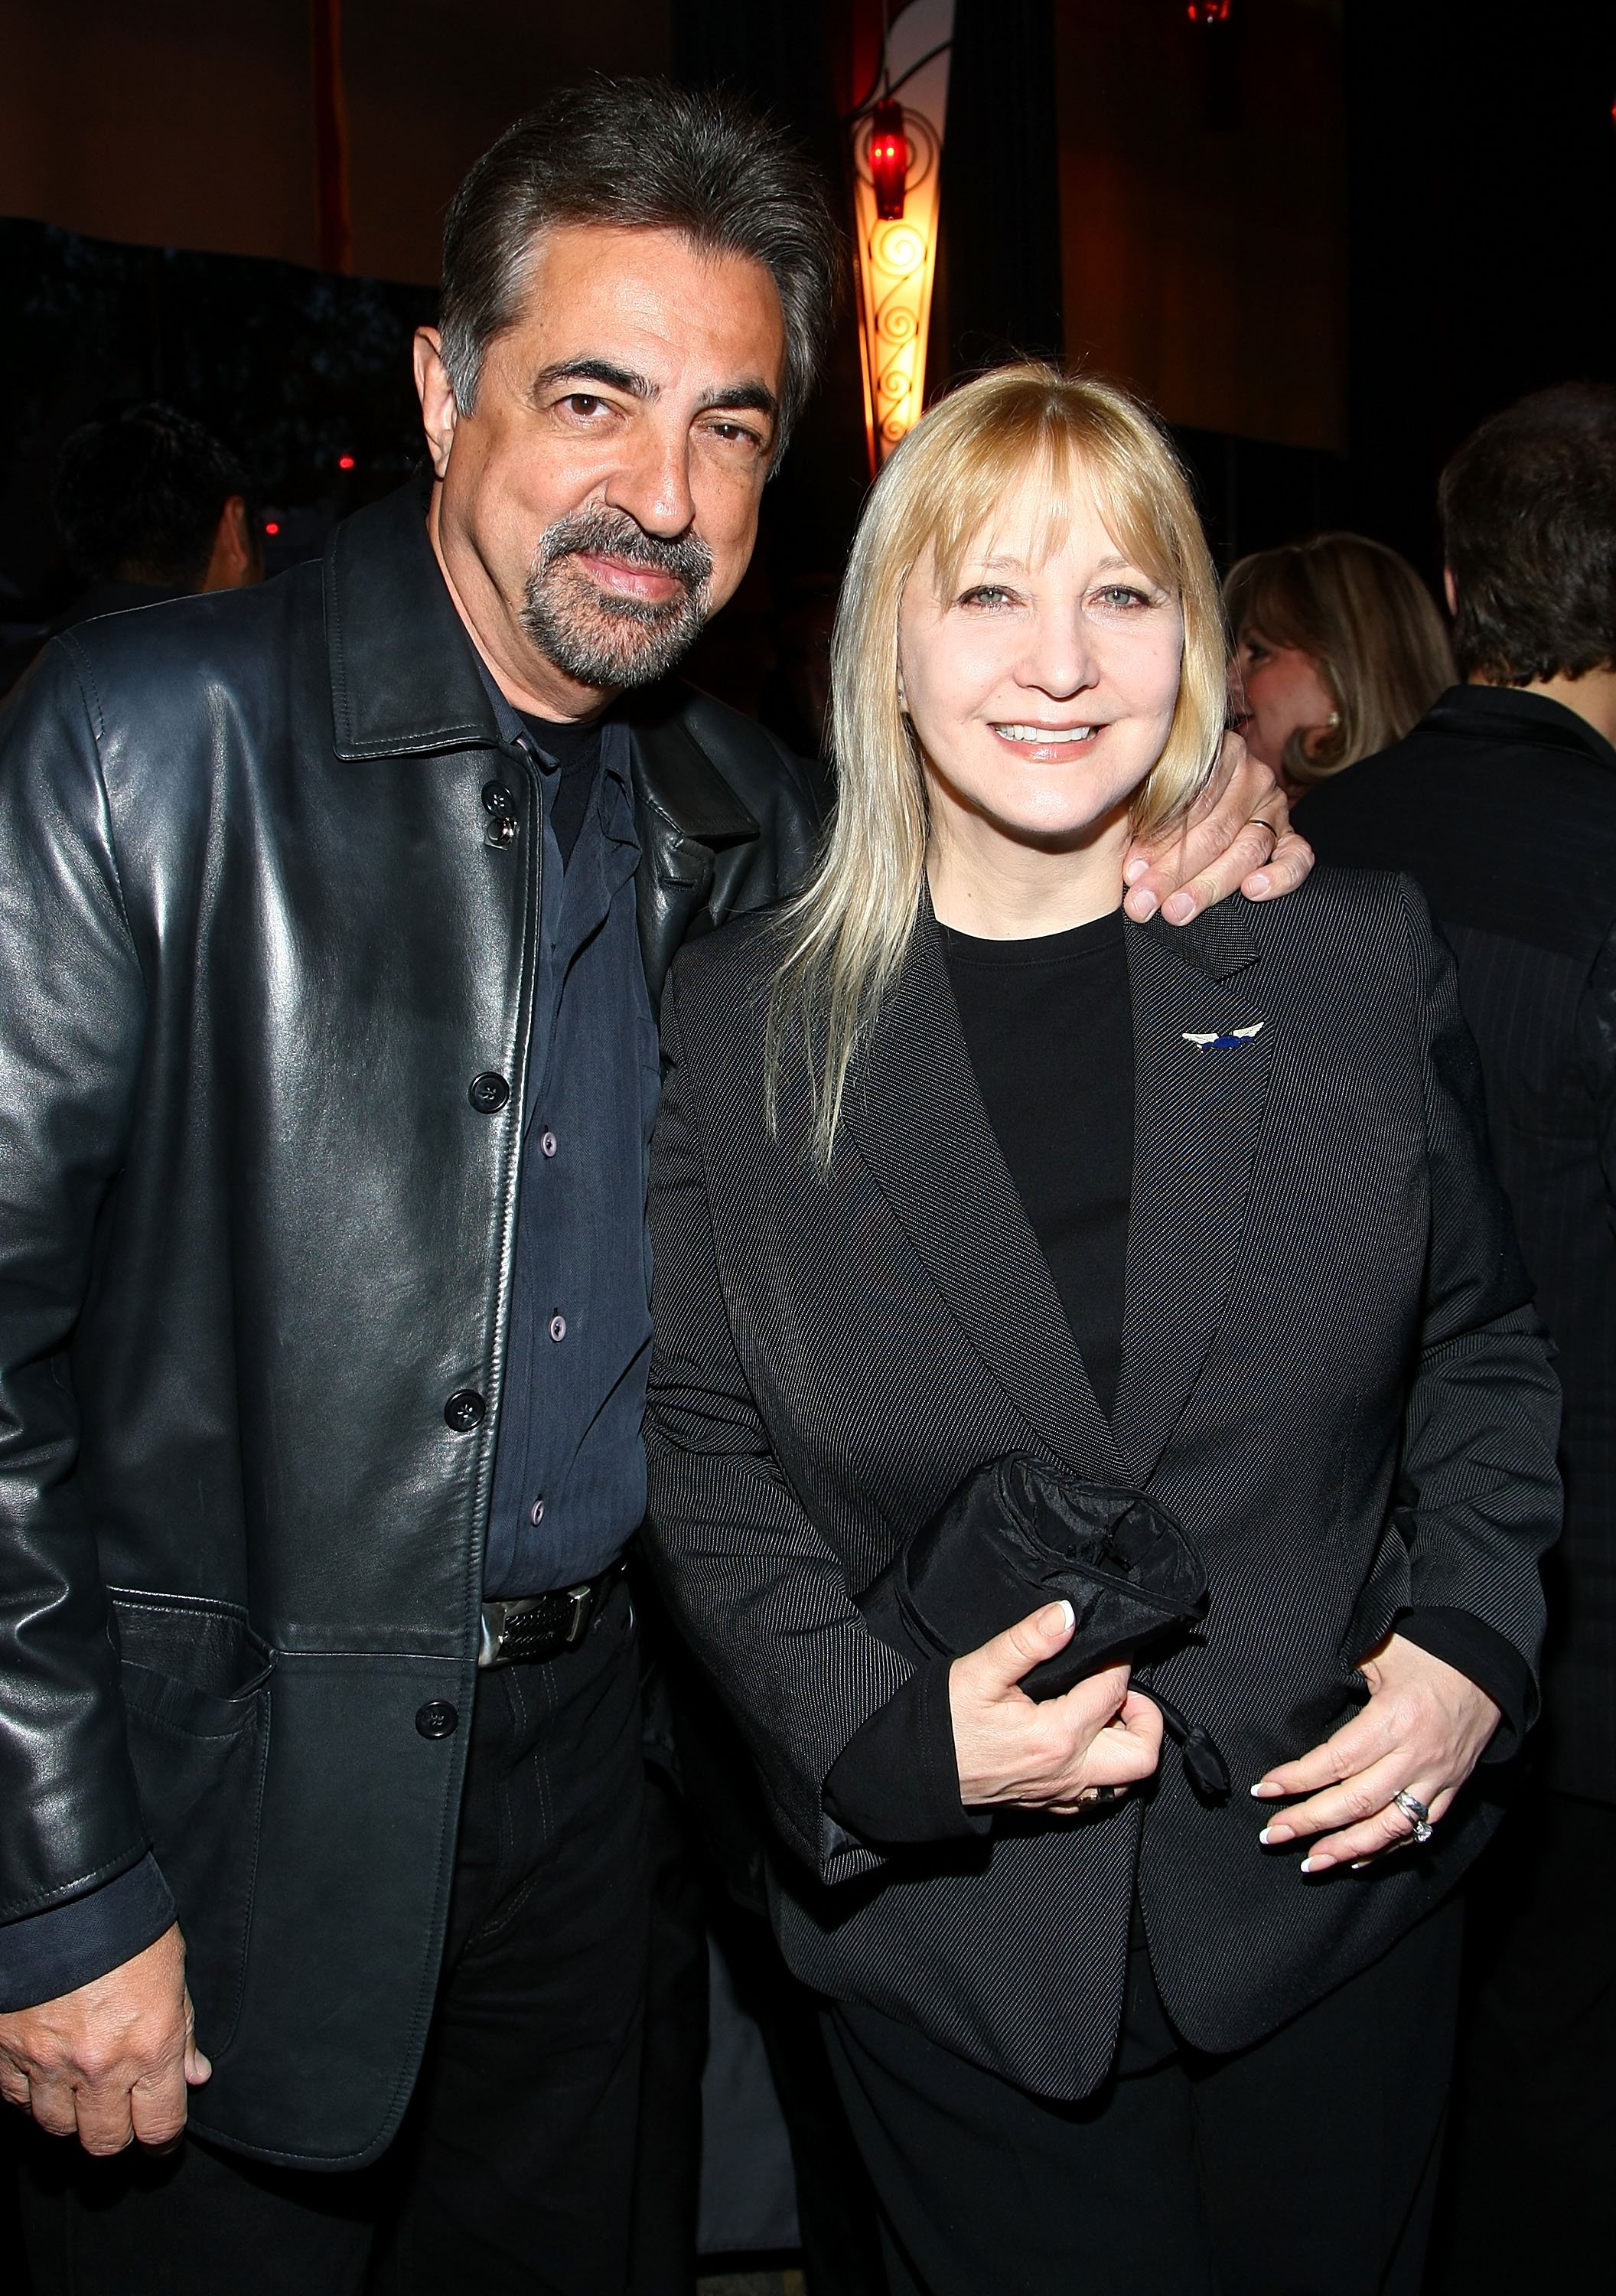 Joe Mantegna and wife Arlene Vrhel attend The Tonys Go Hollywood event. Getty Images